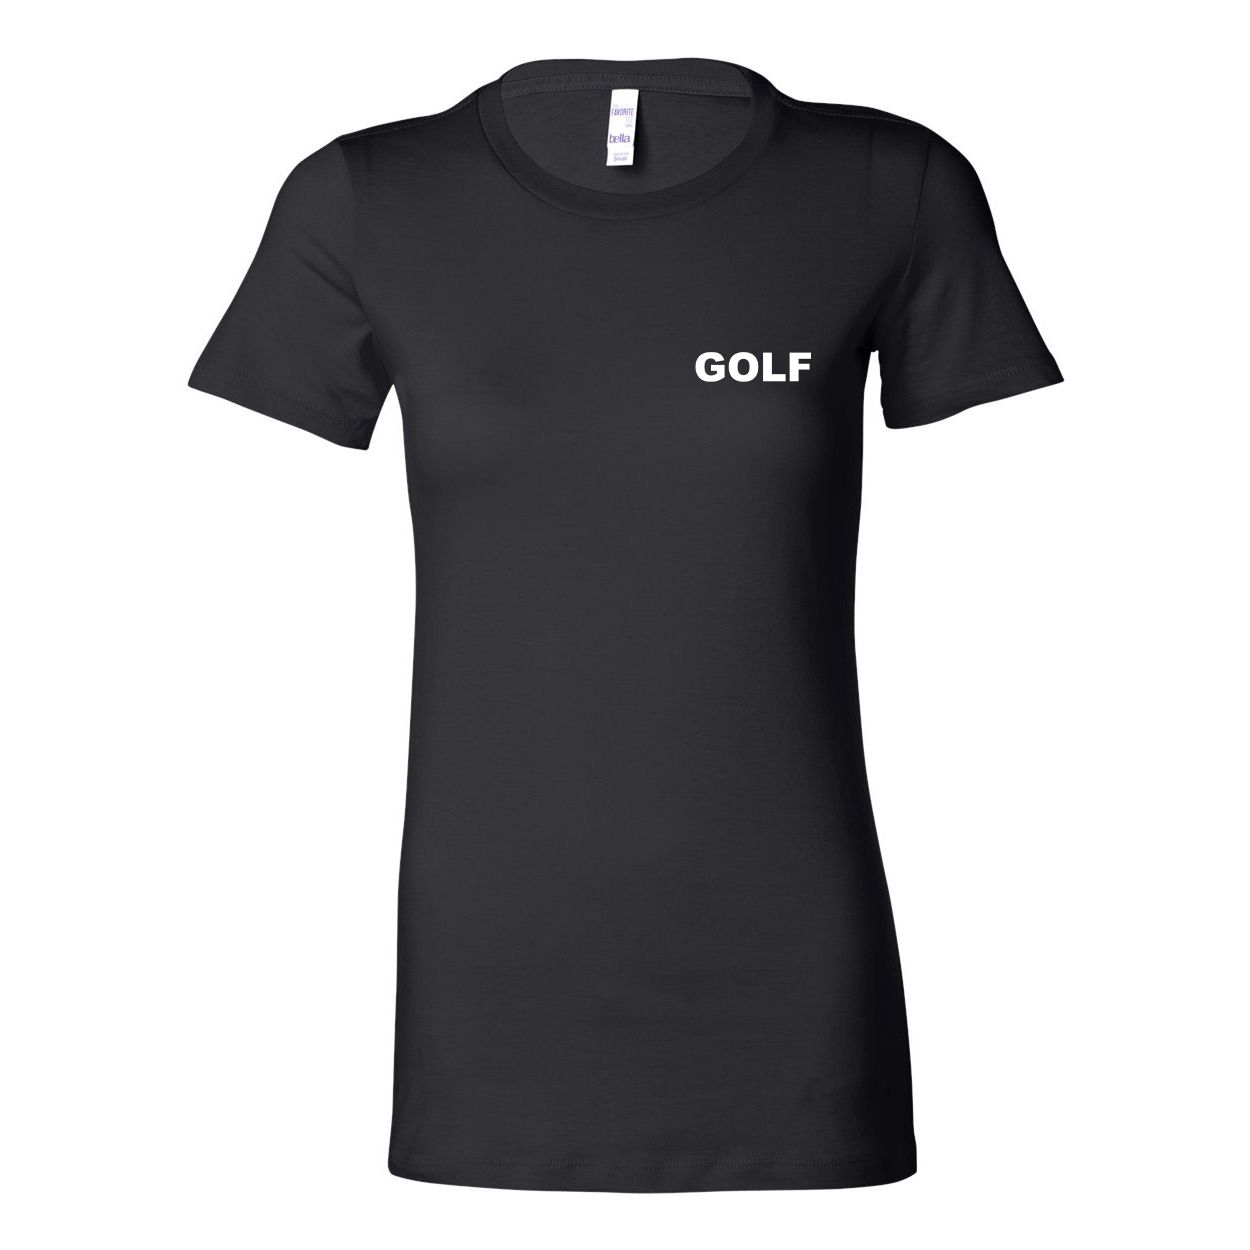 Golf Brand Logo Women's Night Out Fitted Tri-Blend T-Shirt Black